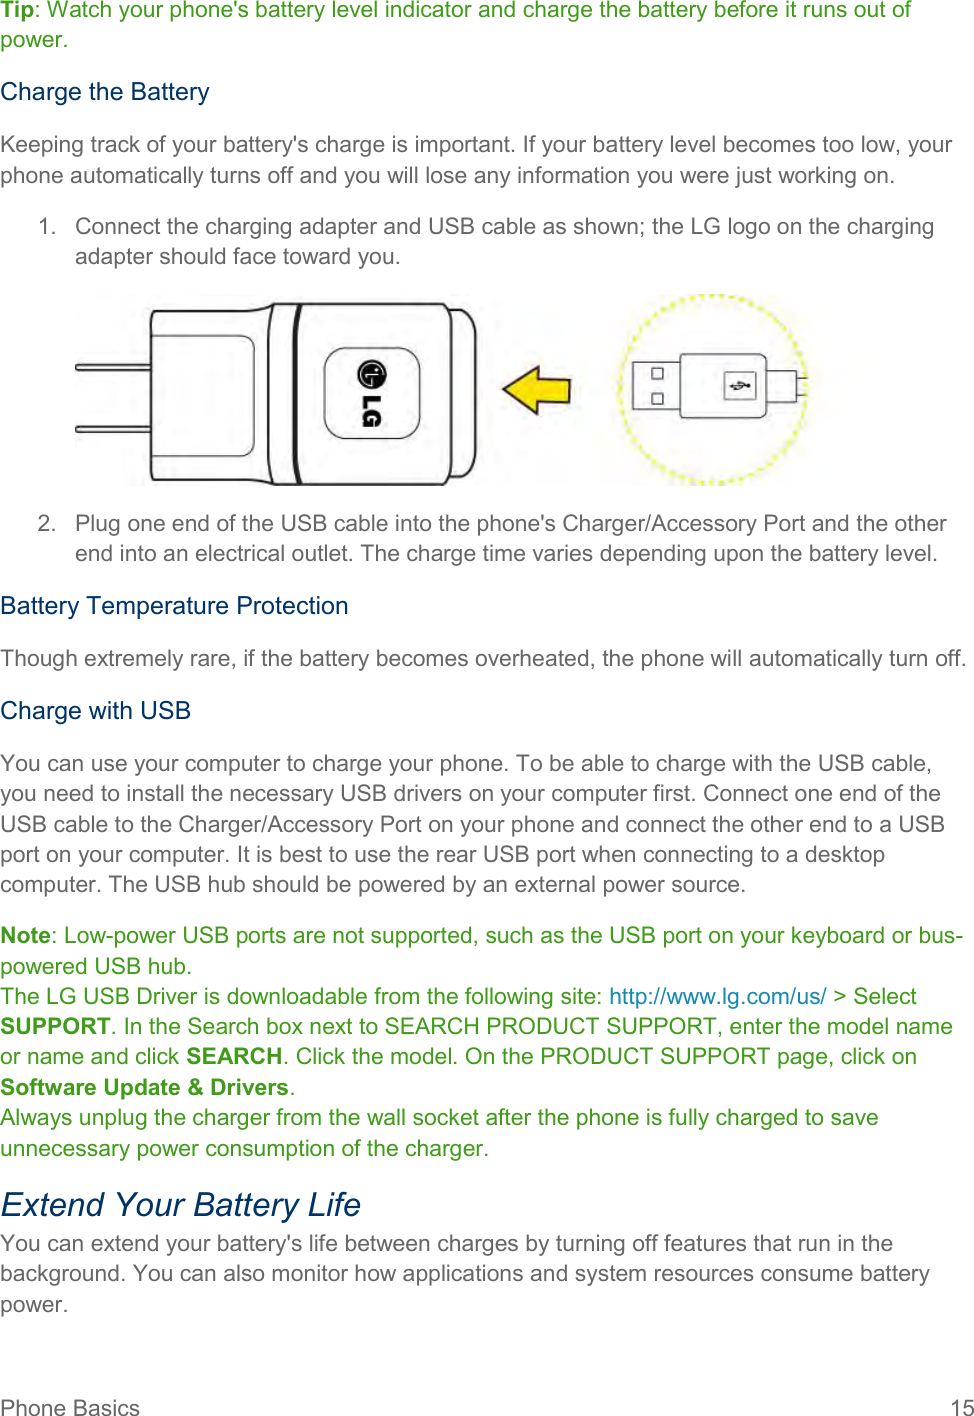 Phone Basics  15 Tip: Watch your phone&apos;s battery level indicator and charge the battery before it runs out of power. Charge the Battery Keeping track of your battery&apos;s charge is important. If your battery level becomes too low, your phone automatically turns off and you will lose any information you were just working on. 1.  Connect the charging adapter and USB cable as shown; the LG logo on the charging adapter should face toward you.  2.  Plug one end of the USB cable into the phone&apos;s Charger/Accessory Port and the other end into an electrical outlet. The charge time varies depending upon the battery level. Battery Temperature Protection Though extremely rare, if the battery becomes overheated, the phone will automatically turn off. Charge with USB You can use your computer to charge your phone. To be able to charge with the USB cable, you need to install the necessary USB drivers on your computer first. Connect one end of the USB cable to the Charger/Accessory Port on your phone and connect the other end to a USB port on your computer. It is best to use the rear USB port when connecting to a desktop computer. The USB hub should be powered by an external power source. Note: Low-power USB ports are not supported, such as the USB port on your keyboard or bus-powered USB hub. The LG USB Driver is downloadable from the following site: http://www.lg.com/us/ &gt; Select SUPPORT. In the Search box next to SEARCH PRODUCT SUPPORT, enter the model name or name and click SEARCH. Click the model. On the PRODUCT SUPPORT page, click on Software Update &amp; Drivers. Always unplug the charger from the wall socket after the phone is fully charged to save unnecessary power consumption of the charger. Extend Your Battery Life You can extend your battery&apos;s life between charges by turning off features that run in the background. You can also monitor how applications and system resources consume battery power. 